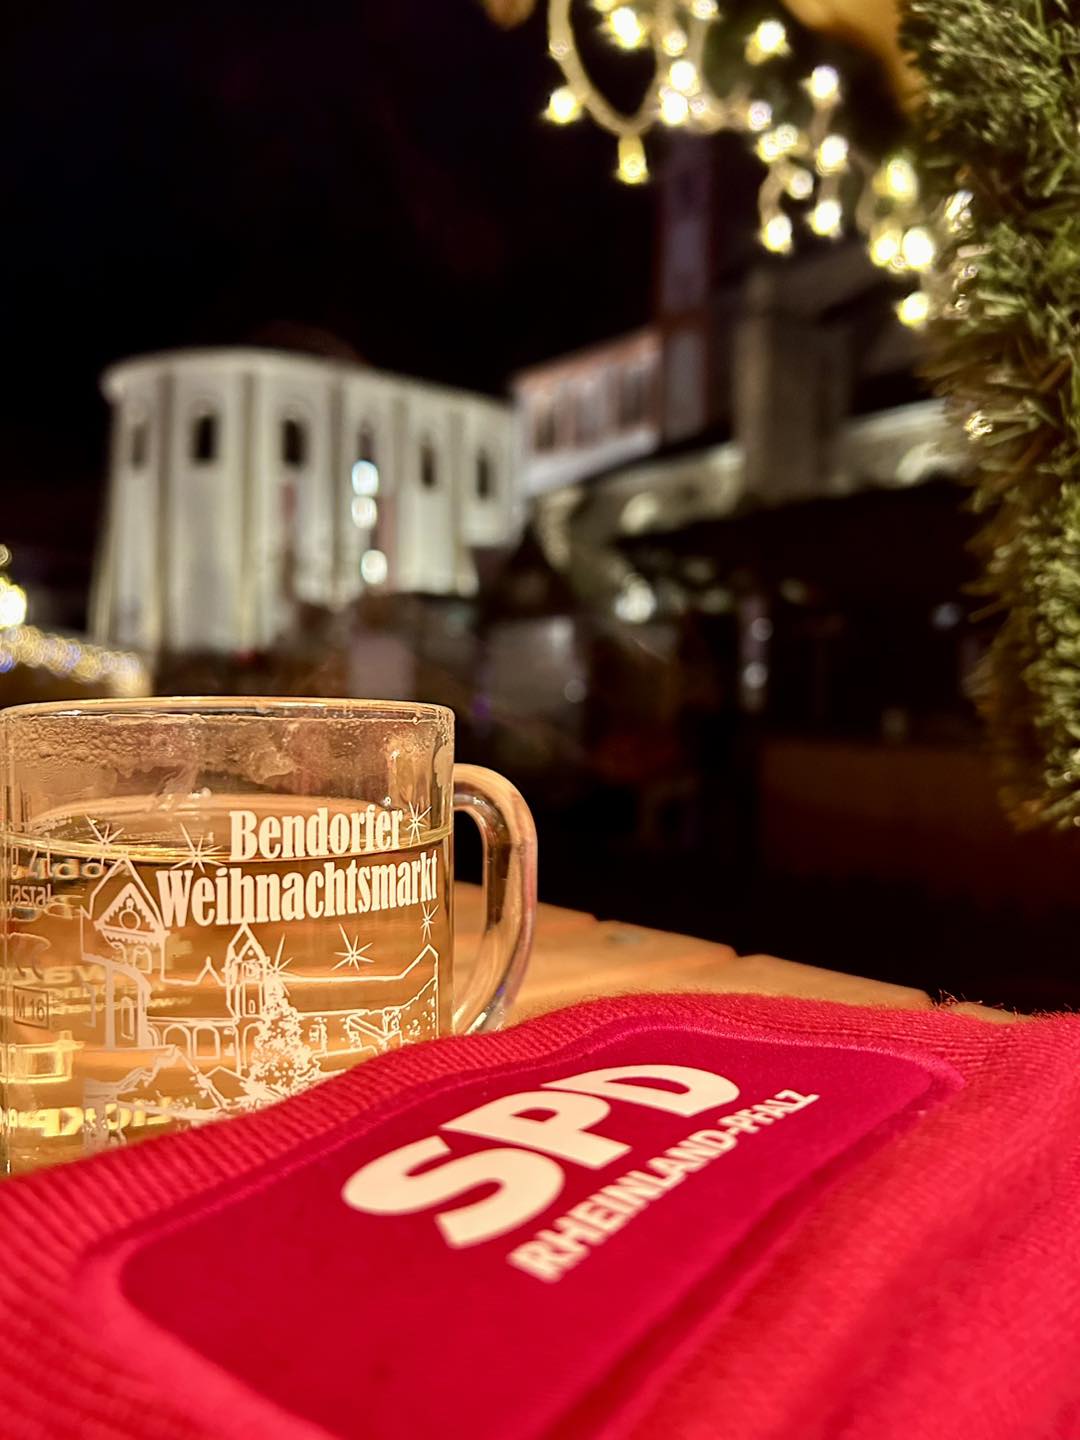 You are currently viewing Weihnachtsmarkt in Bendorf